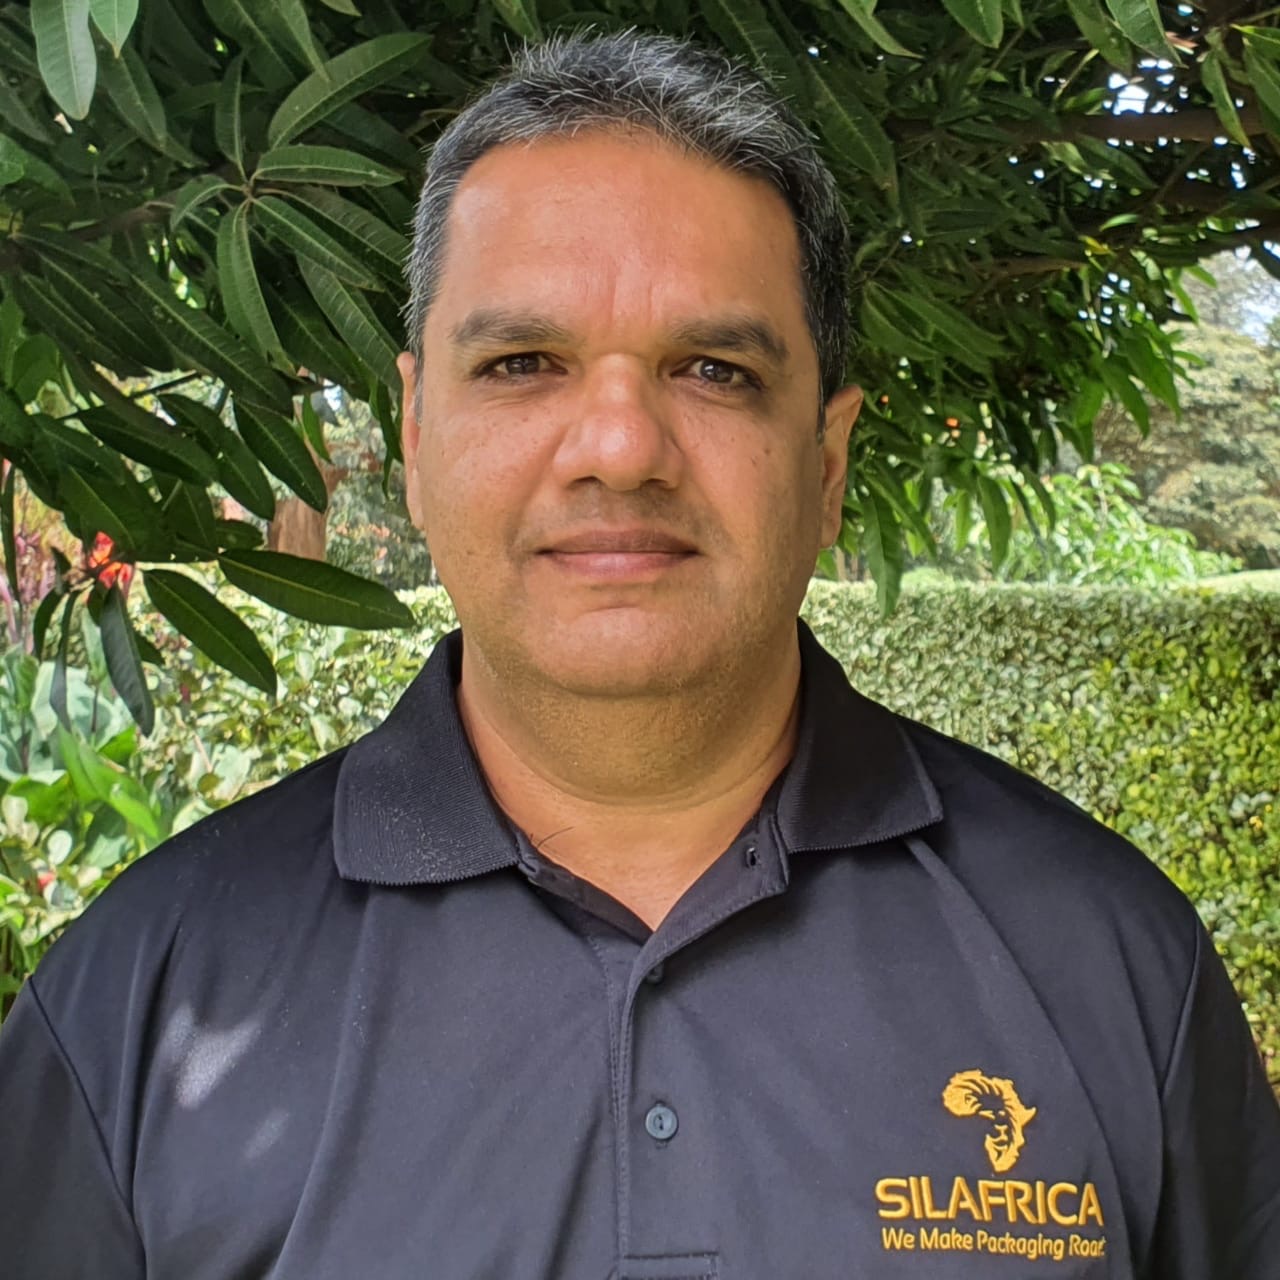 Silafrica’s Group Executive Director, Akshay Shah.